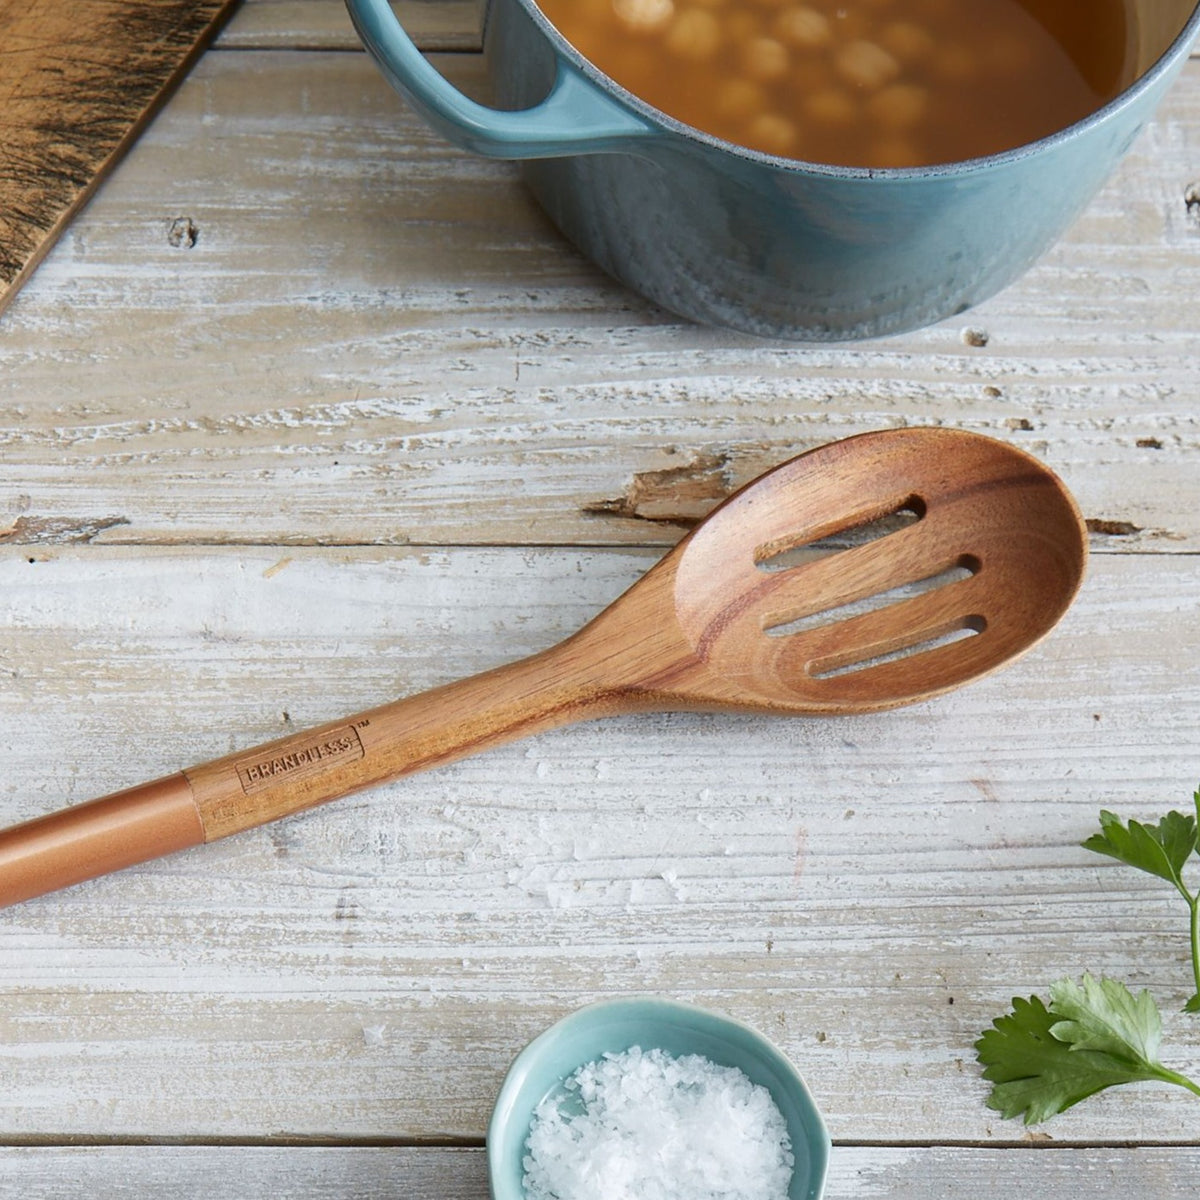 Lifestyle photo, acacia wood slotted serving spoon resting on kitchen table next to a pot full of chickpeas soaking.